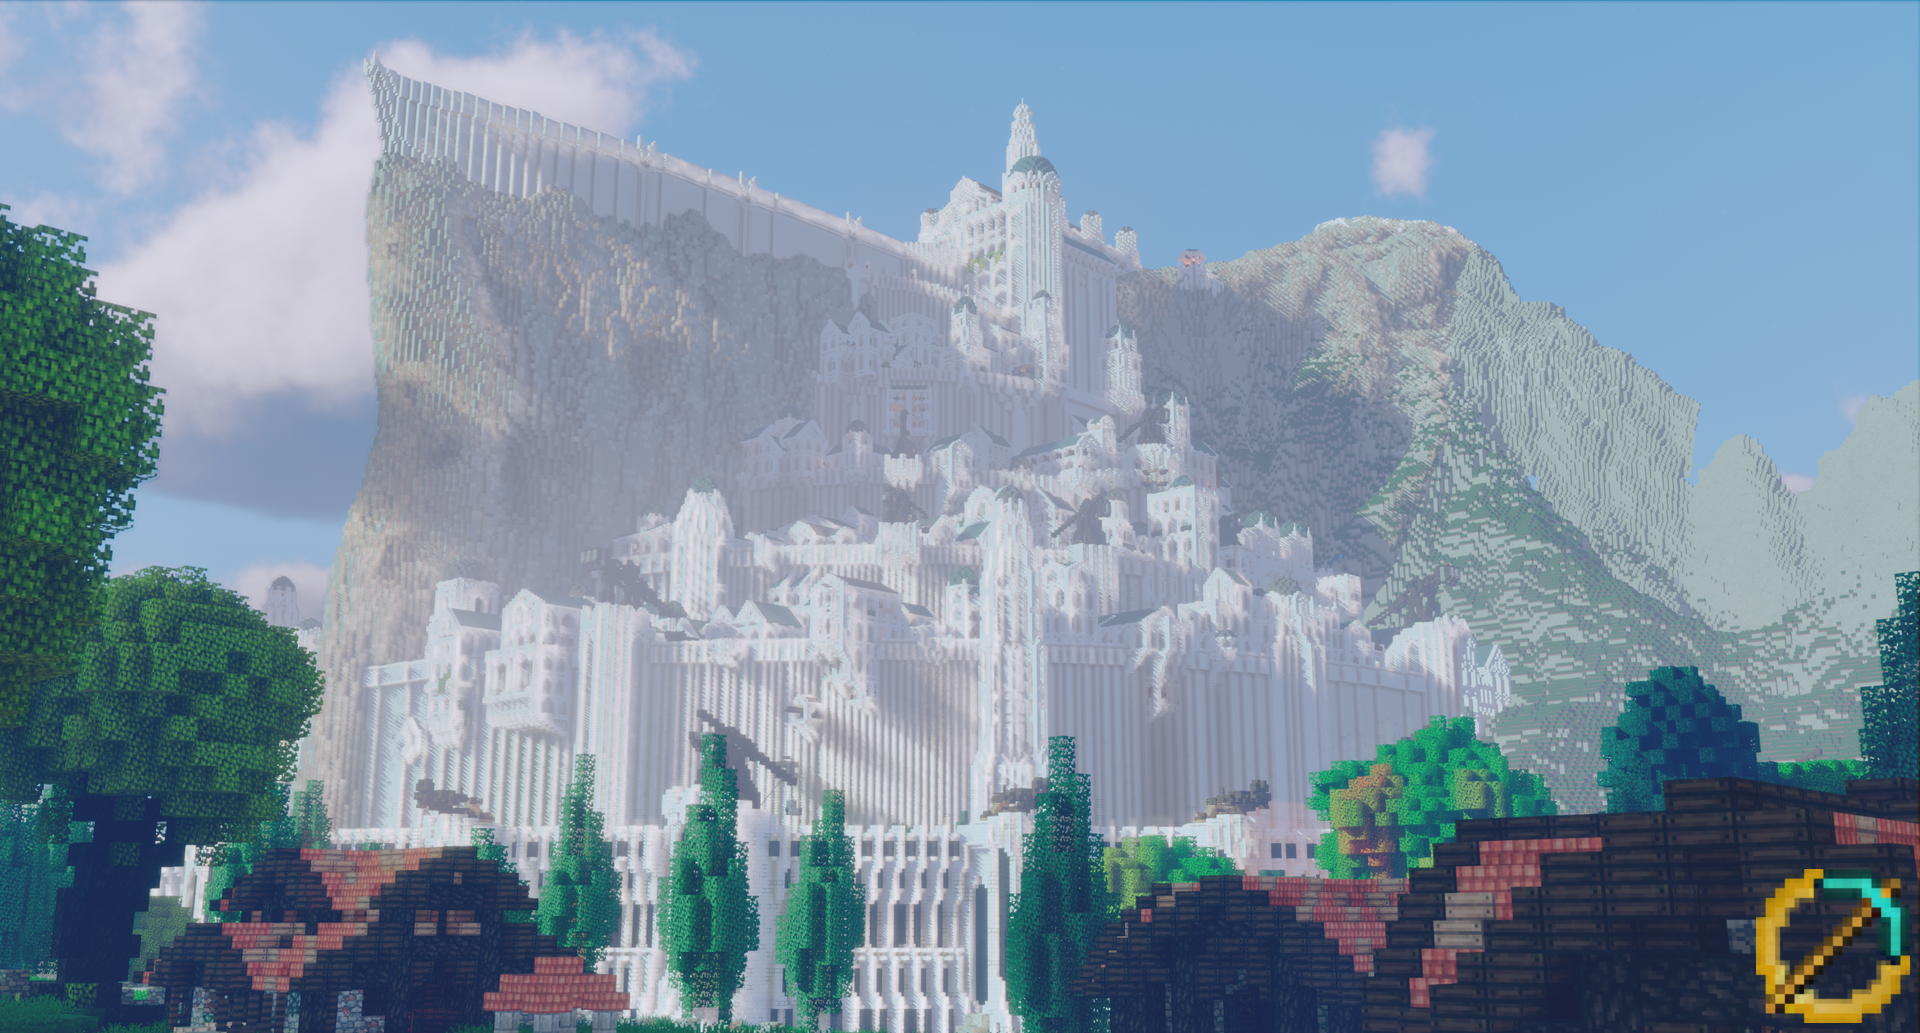 Minecraft Players Recreate Whole Of Middle Earth After Nine Year Effort My  friends! You bow tonoone. in - iFunny Brazil